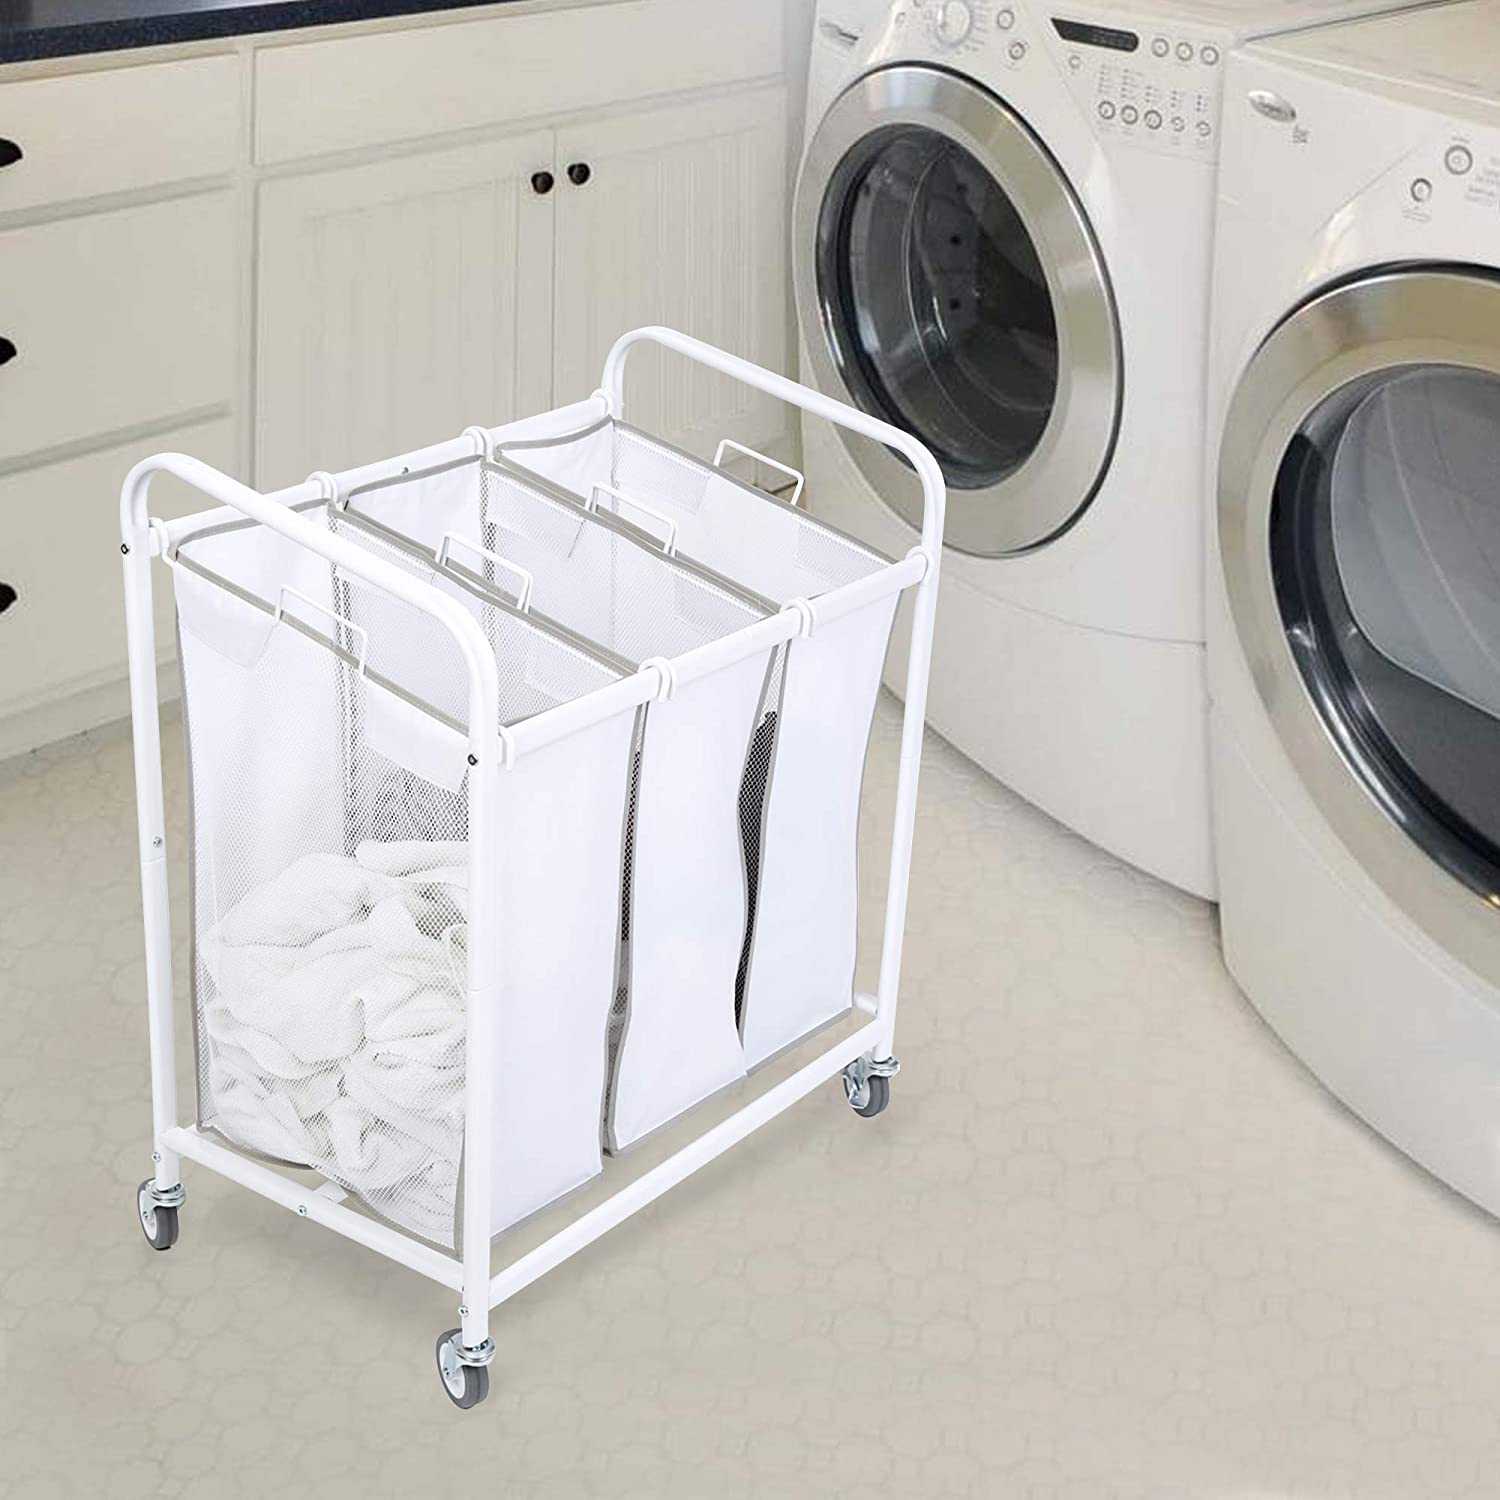 Premium Rolling 3-Compartment Mesh Laundry Sorter Hamper with Wheels and Handles - Holds 9 Loads - Smart Design® 2